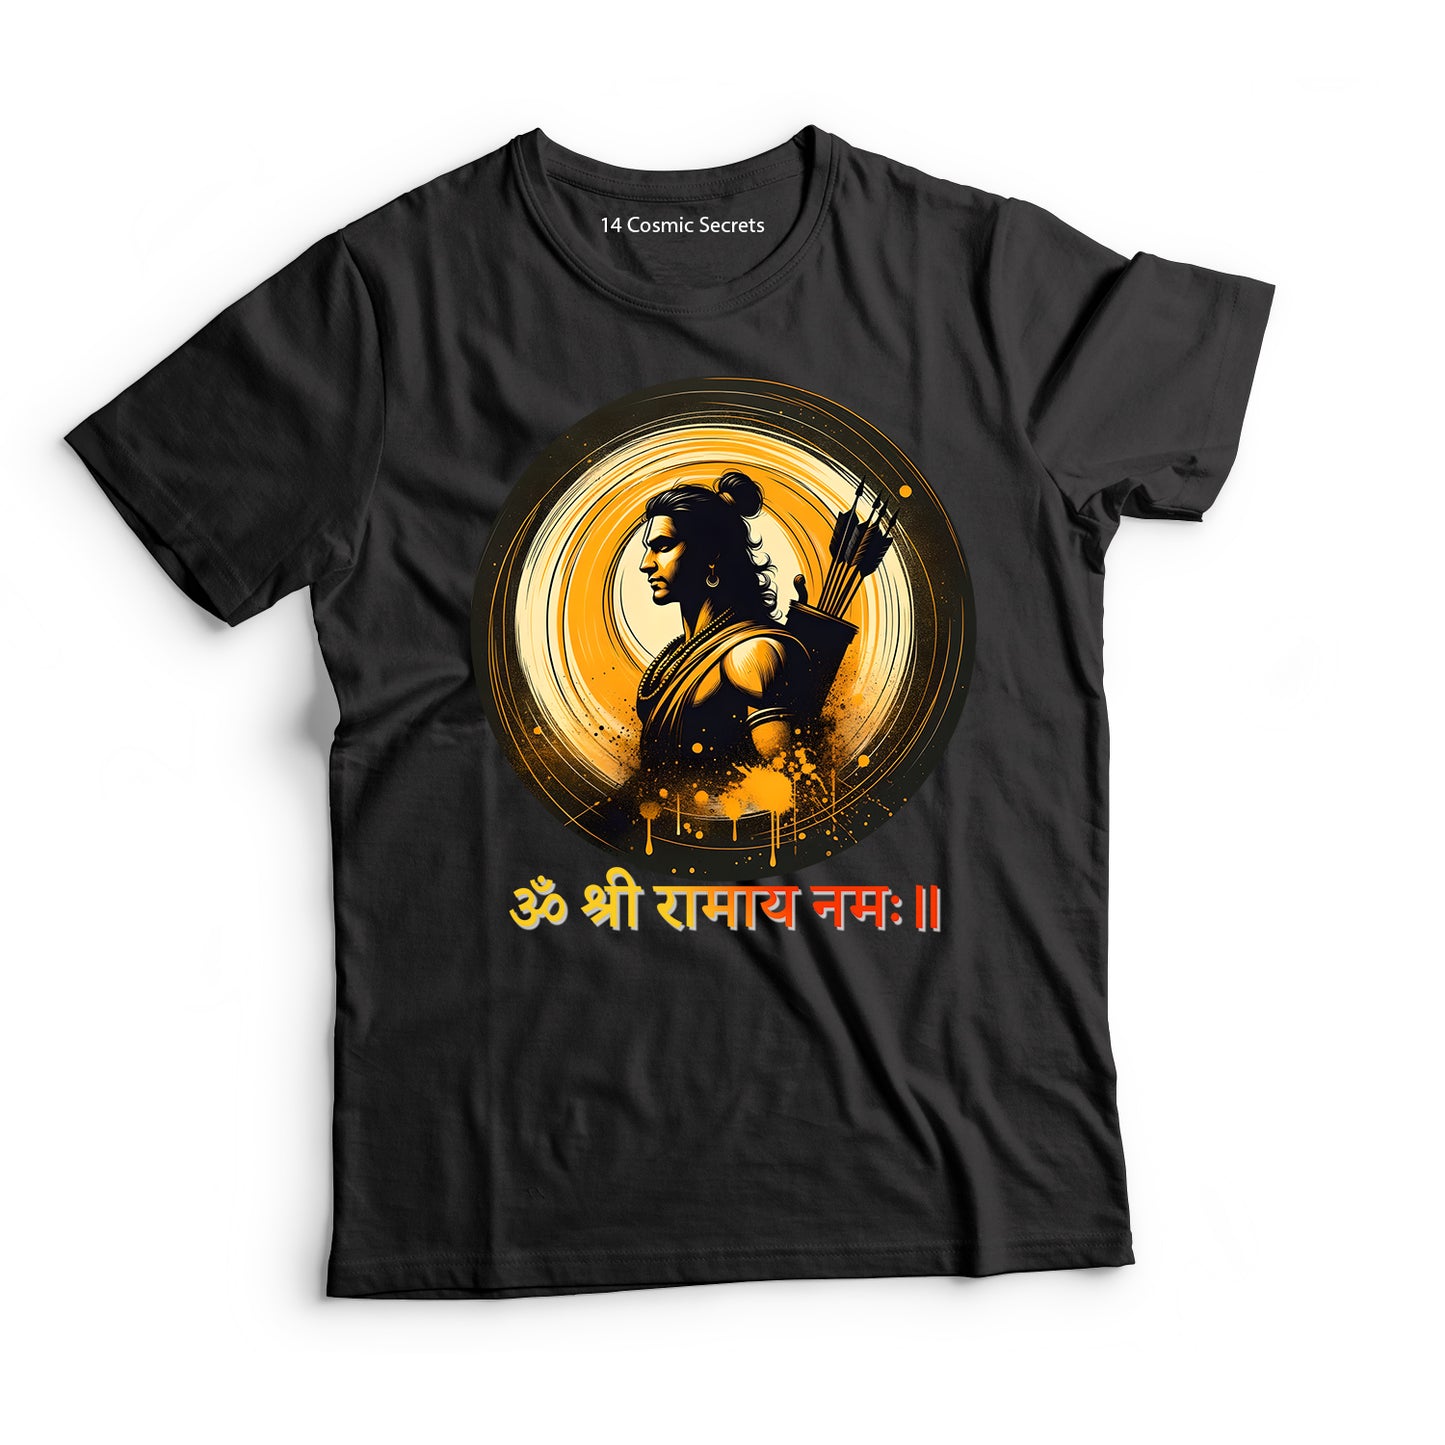 Rama's Righteousness: The Ideal King Graphic Printed T-Shirt for Men Cotton T-Shirt Original Super Heroes of India T-Shirt